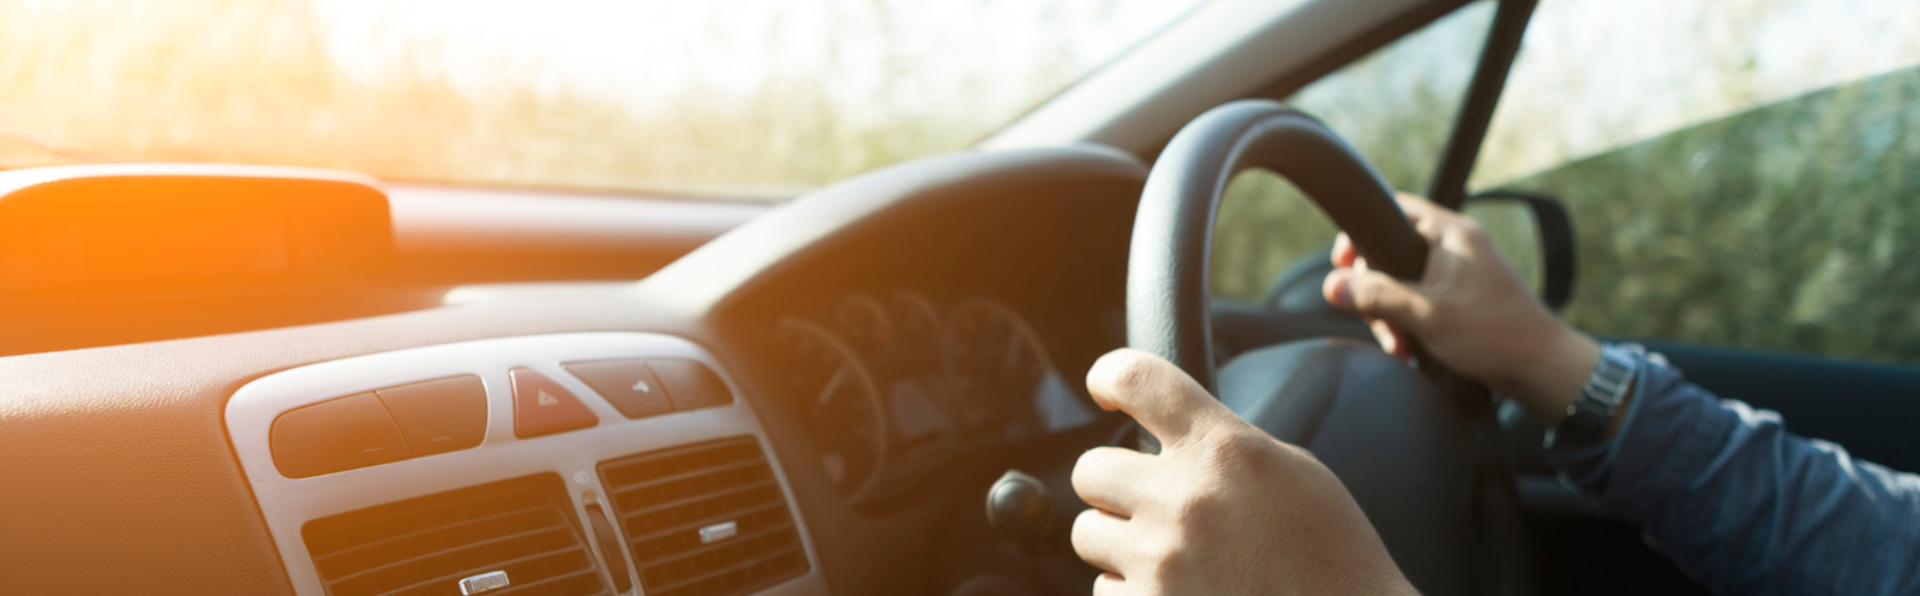 10 Tips to De-stress Behind the Wheel for Safer Driving